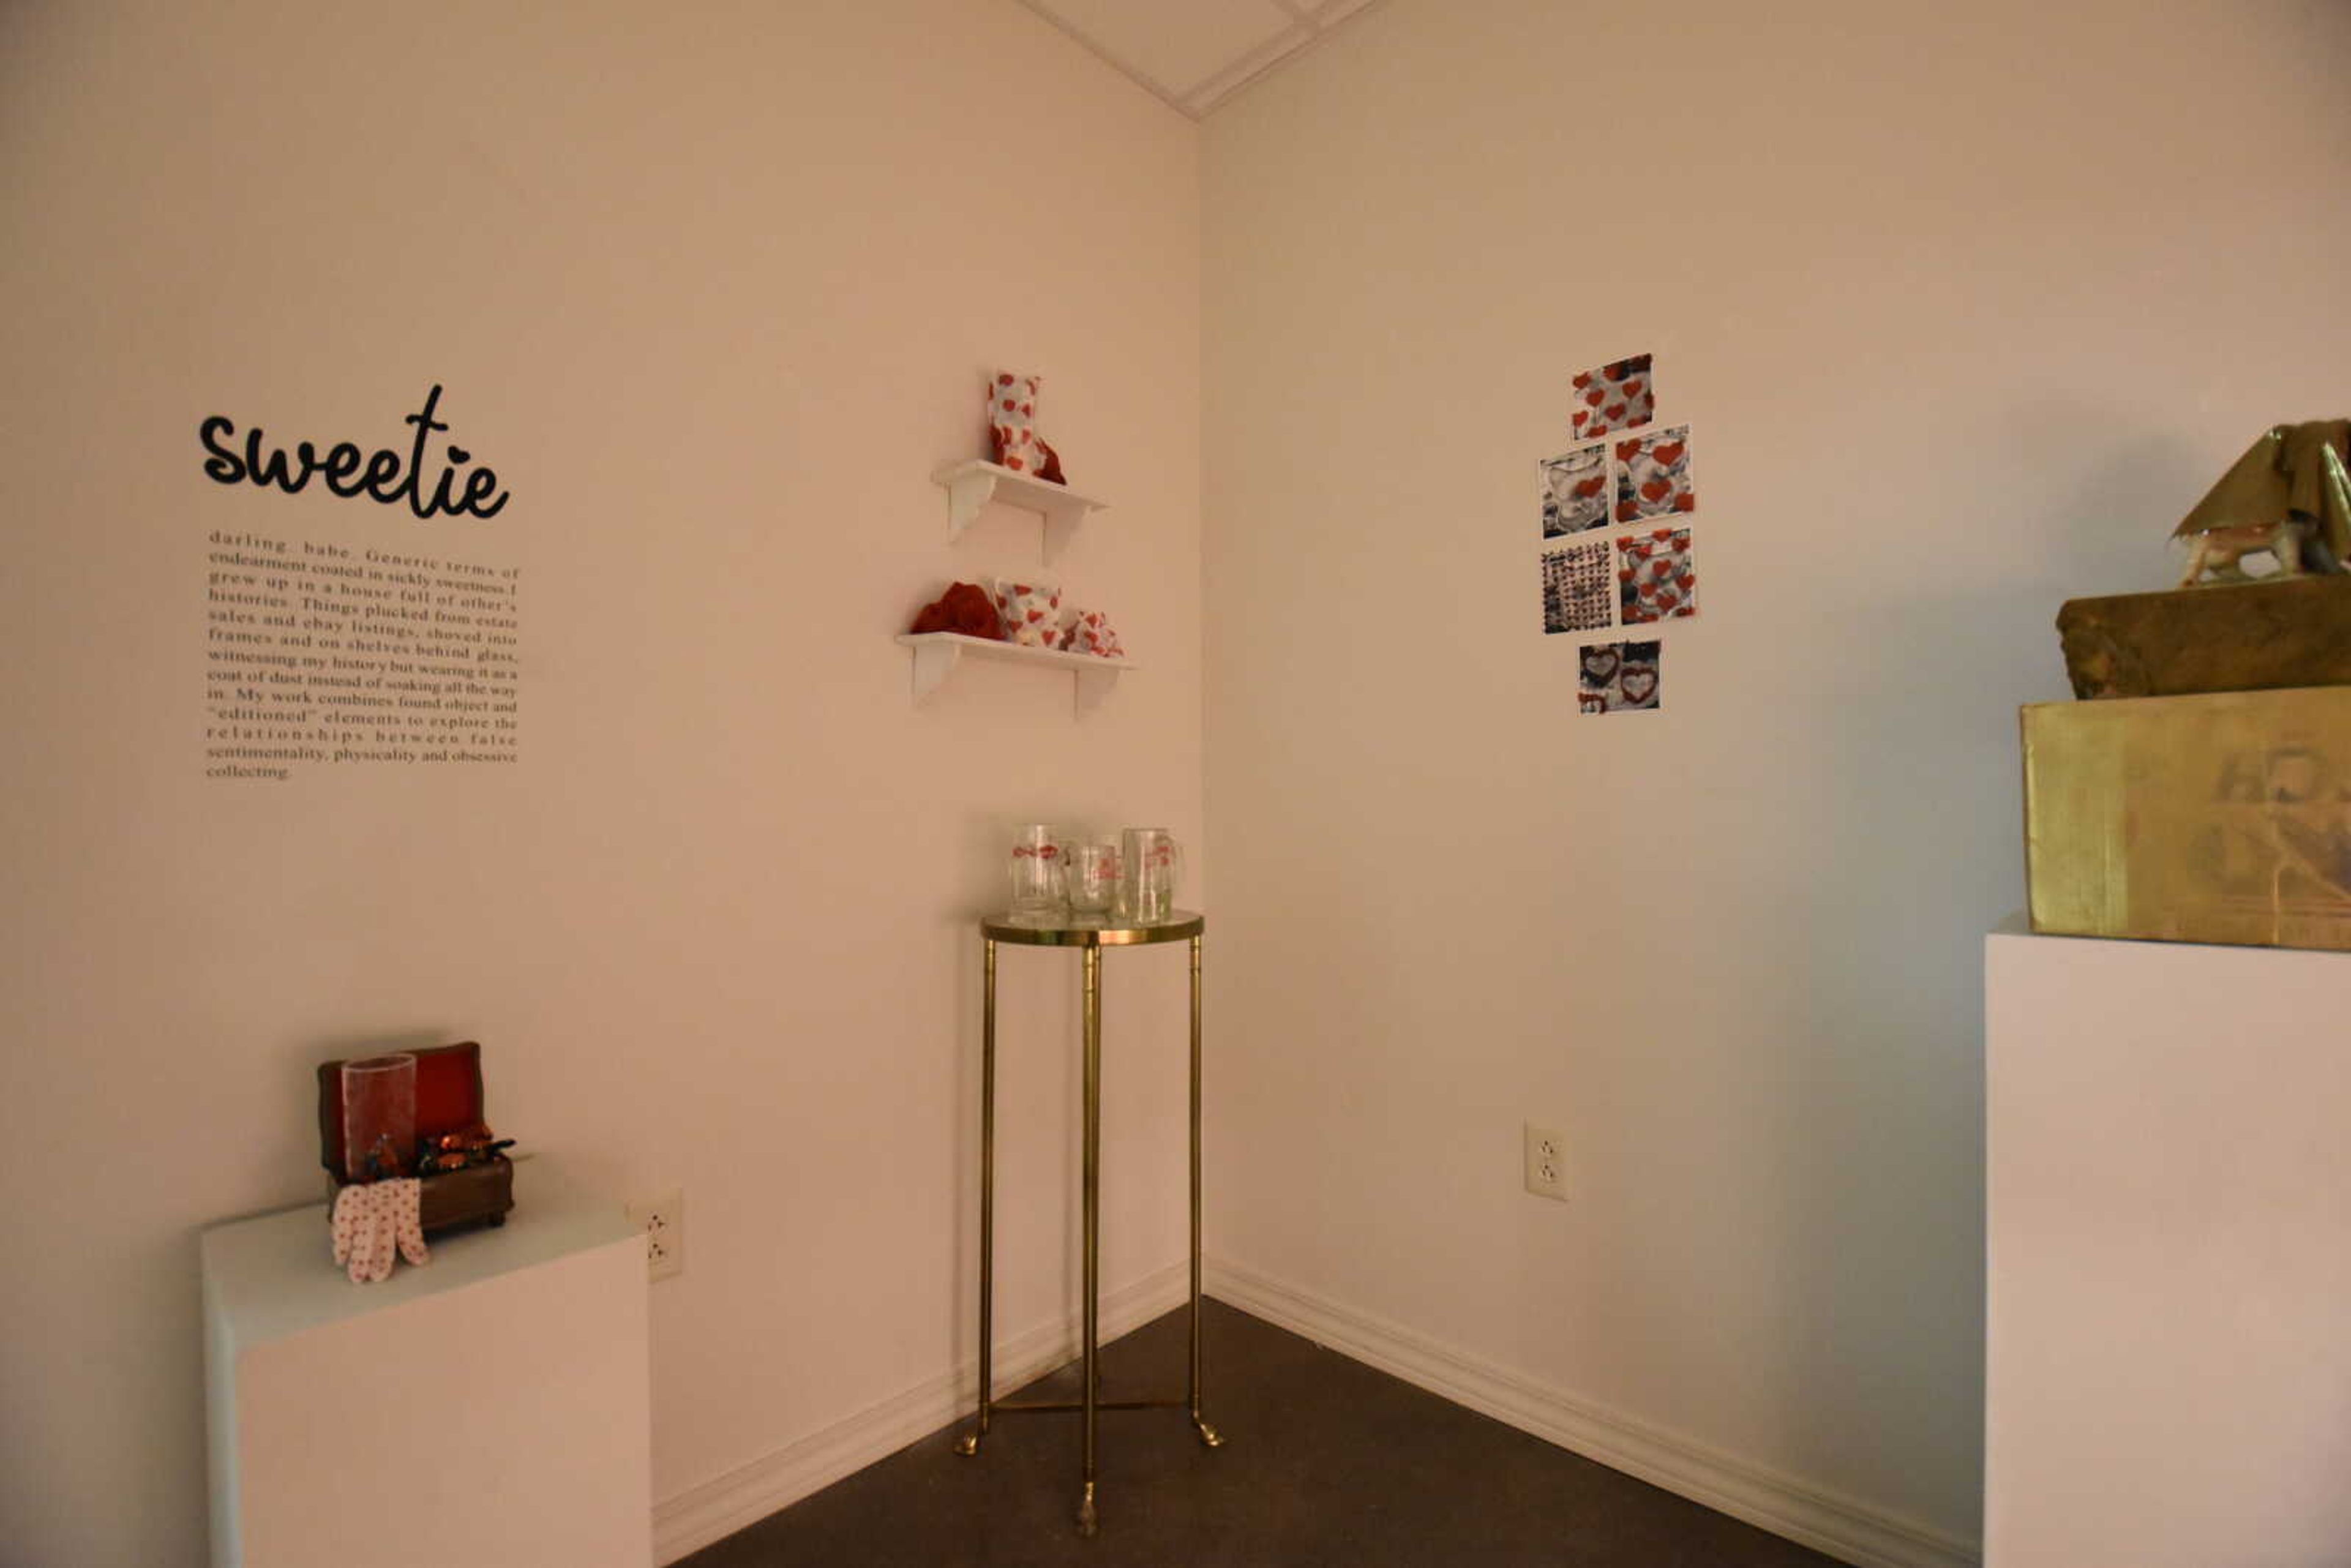 Southeast alumna debuts solo exhibition "Sweetie" at Art Council’s First Friday